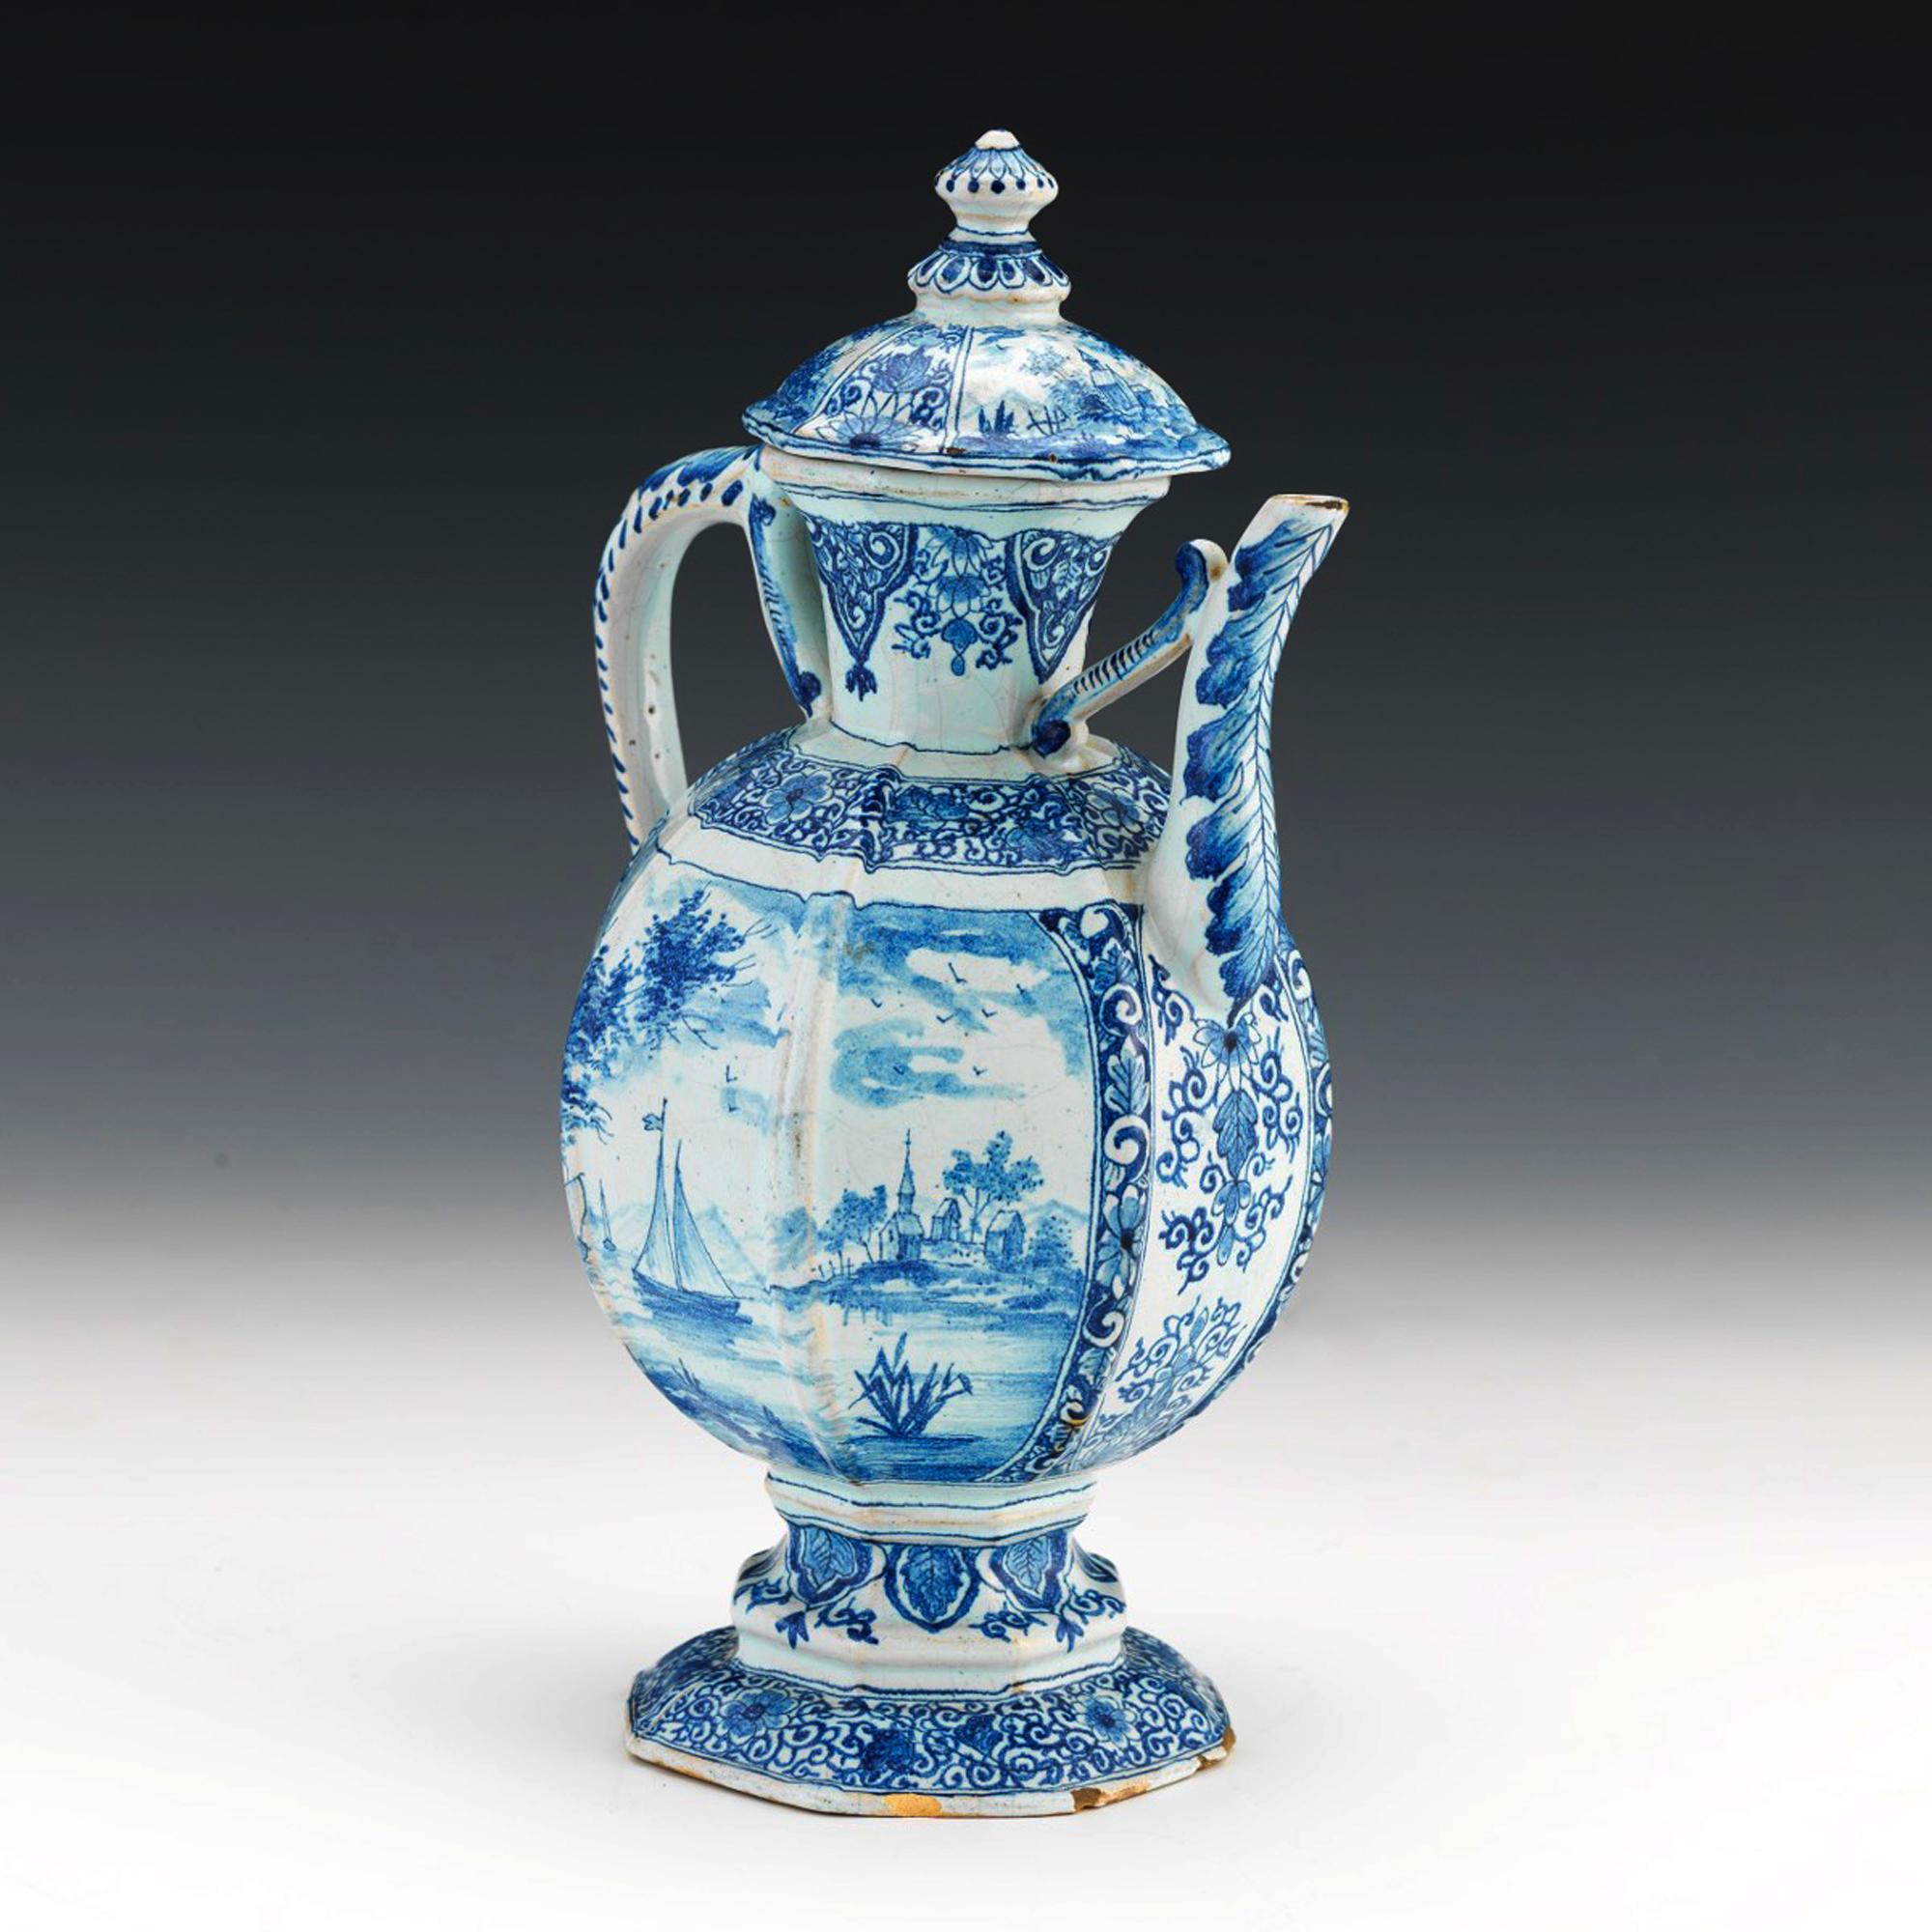 French Faience covered blue & white jug,
circa 1900
The underglaze blue and white faience jug is raised on a hollow foot. The body has eight panels. One side with a sailing ship with ships seen in the background with a small village with a church